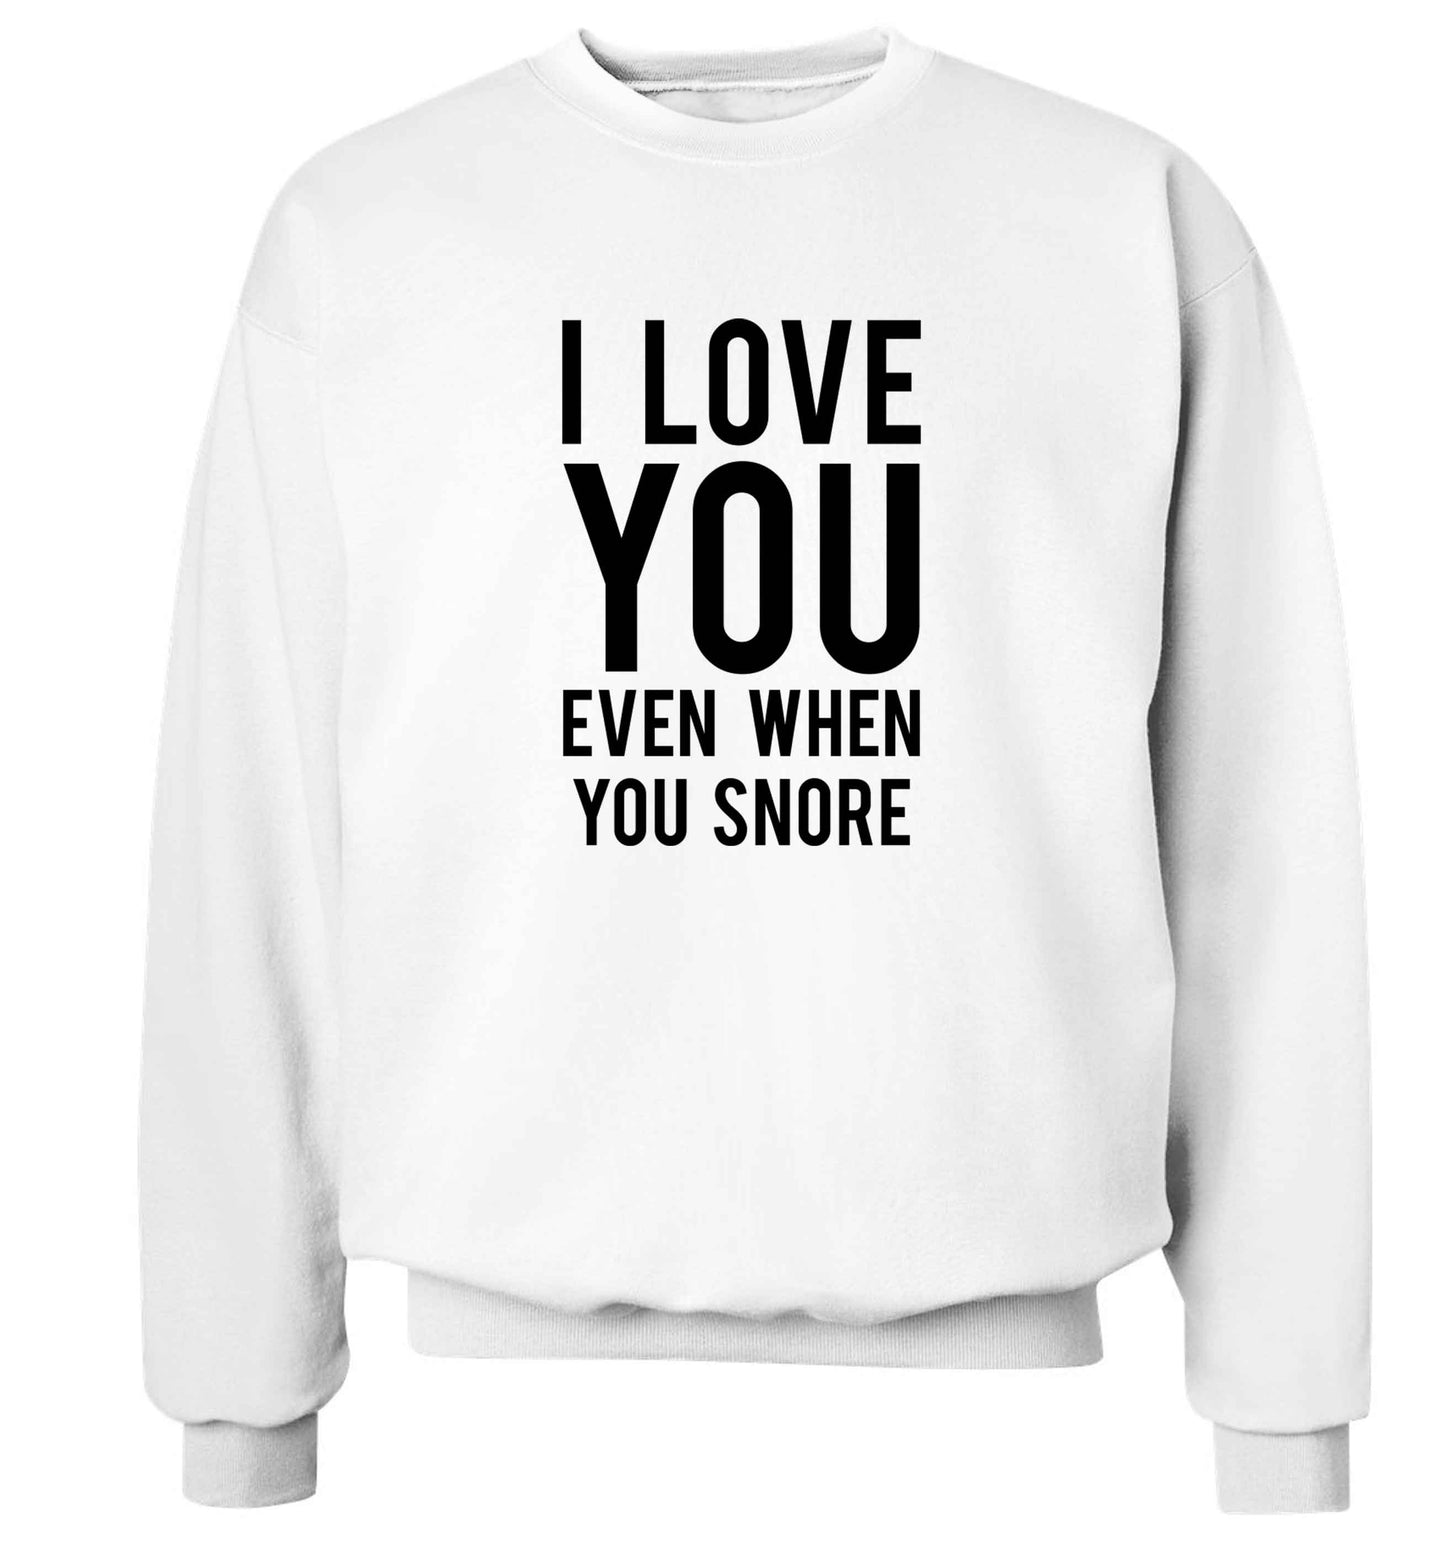 I love you even when you snore adult's unisex white sweater 2XL